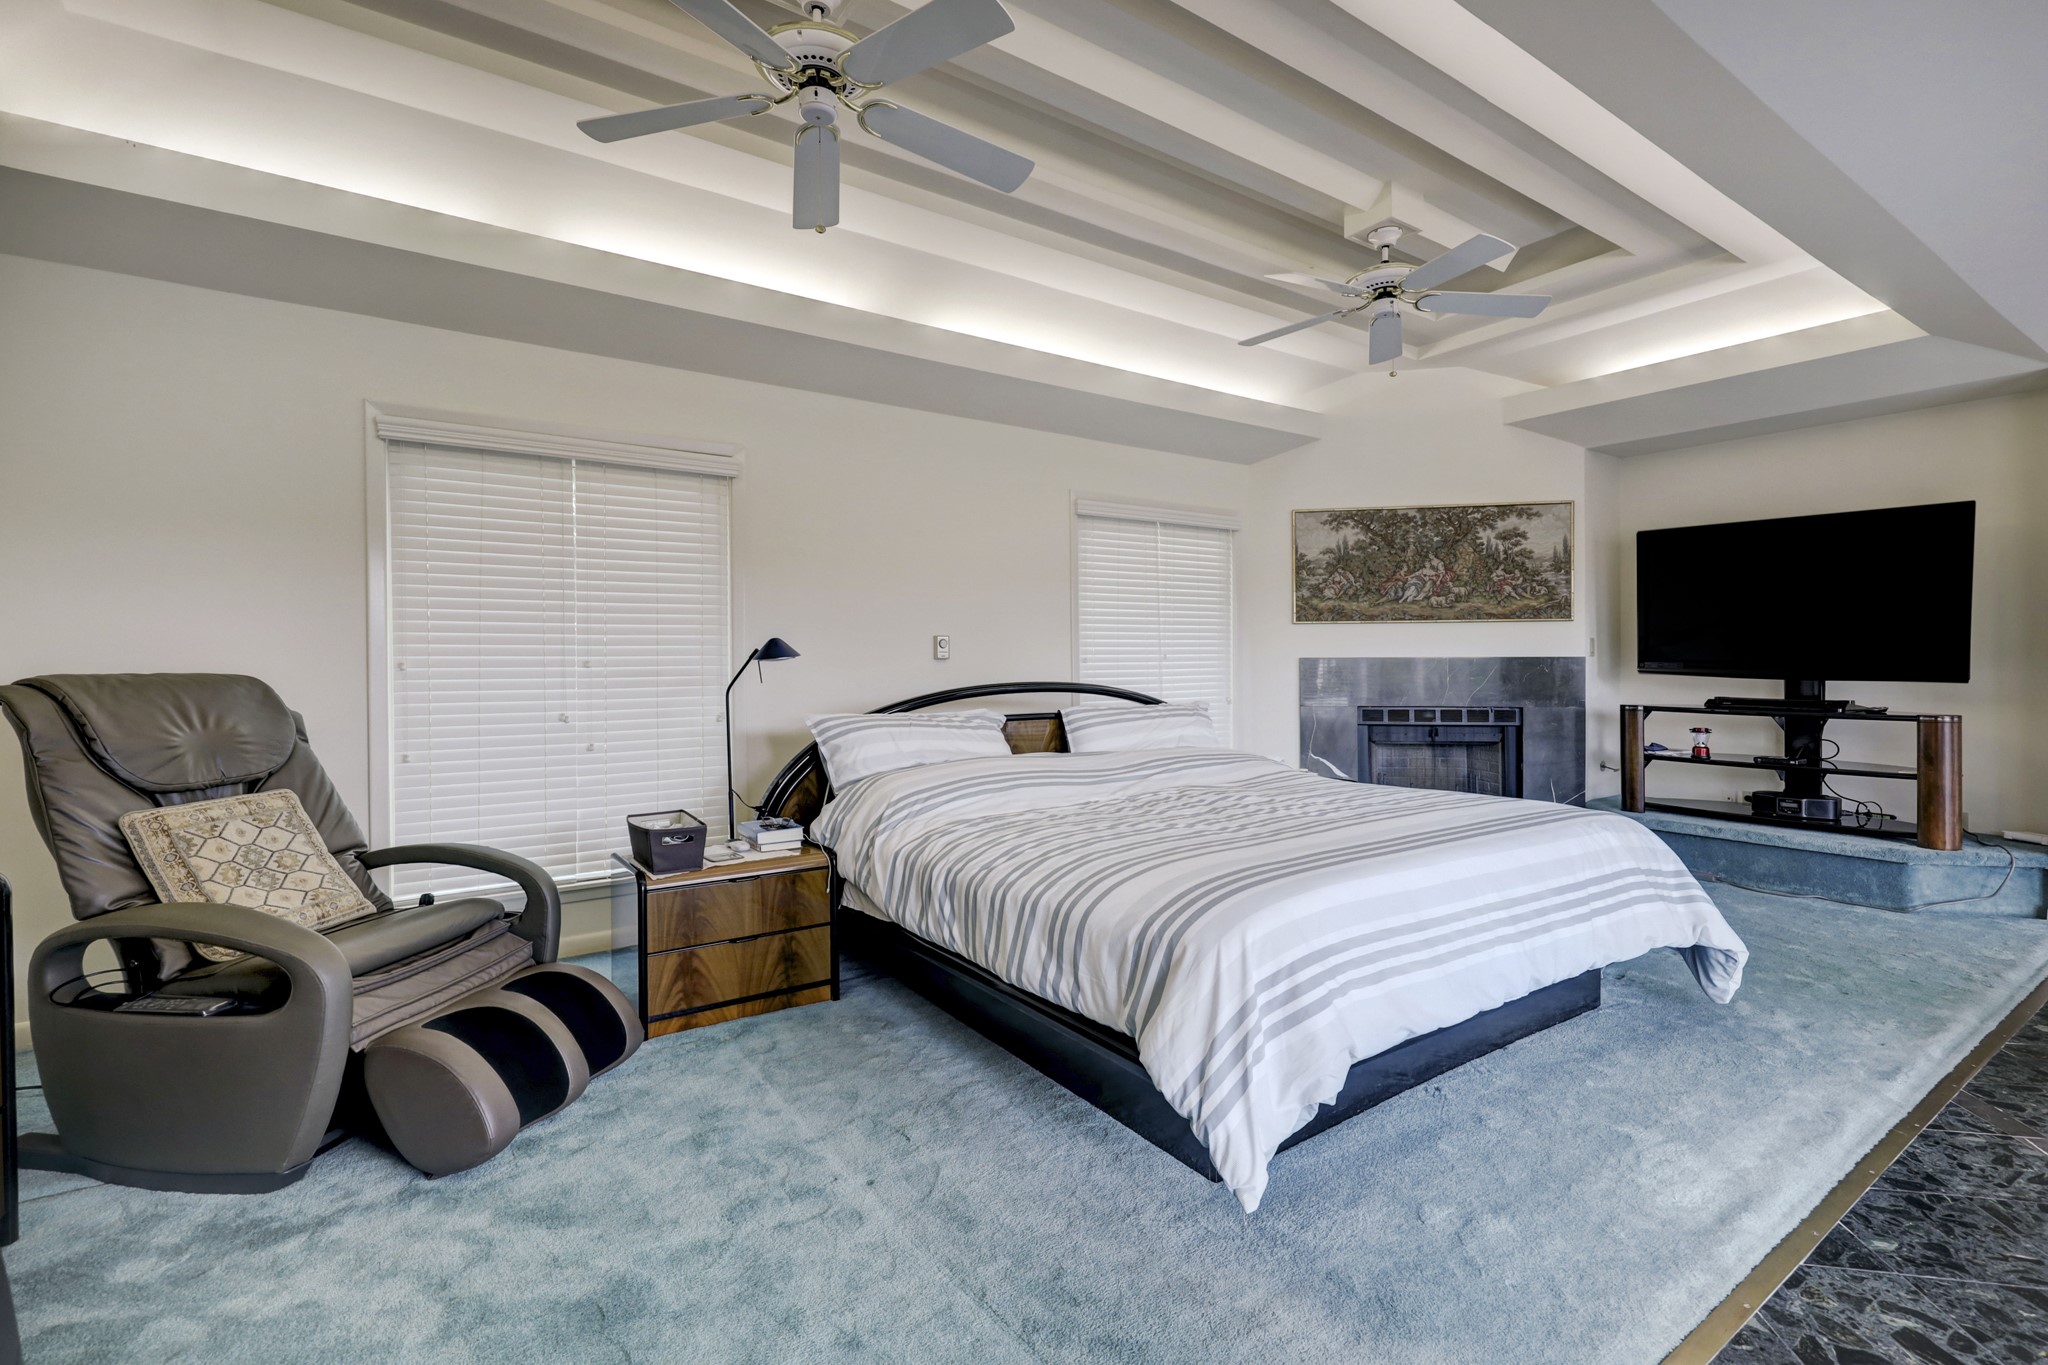 The primary suite is comprised of daul closets, a wall of storage, intricate ceilings with incandesent lighting, corner fireplace, dark room, craft room, study overlooking the pool.